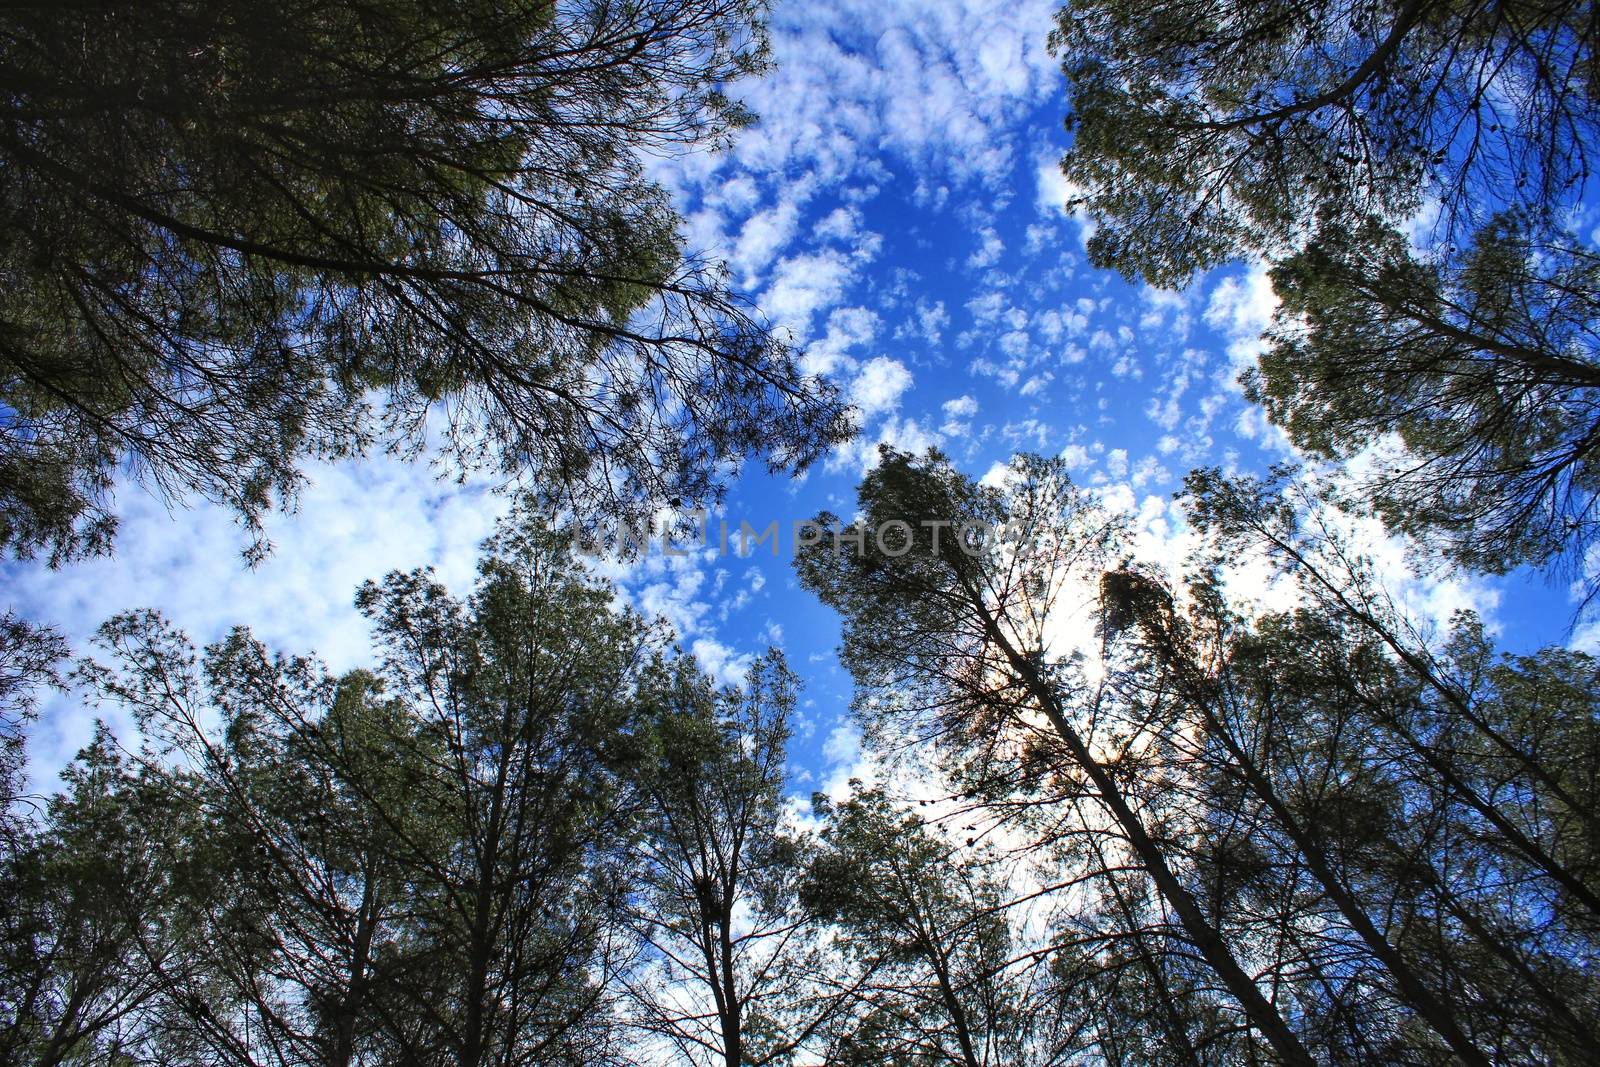 Leafy forest under blue sky by soniabonet